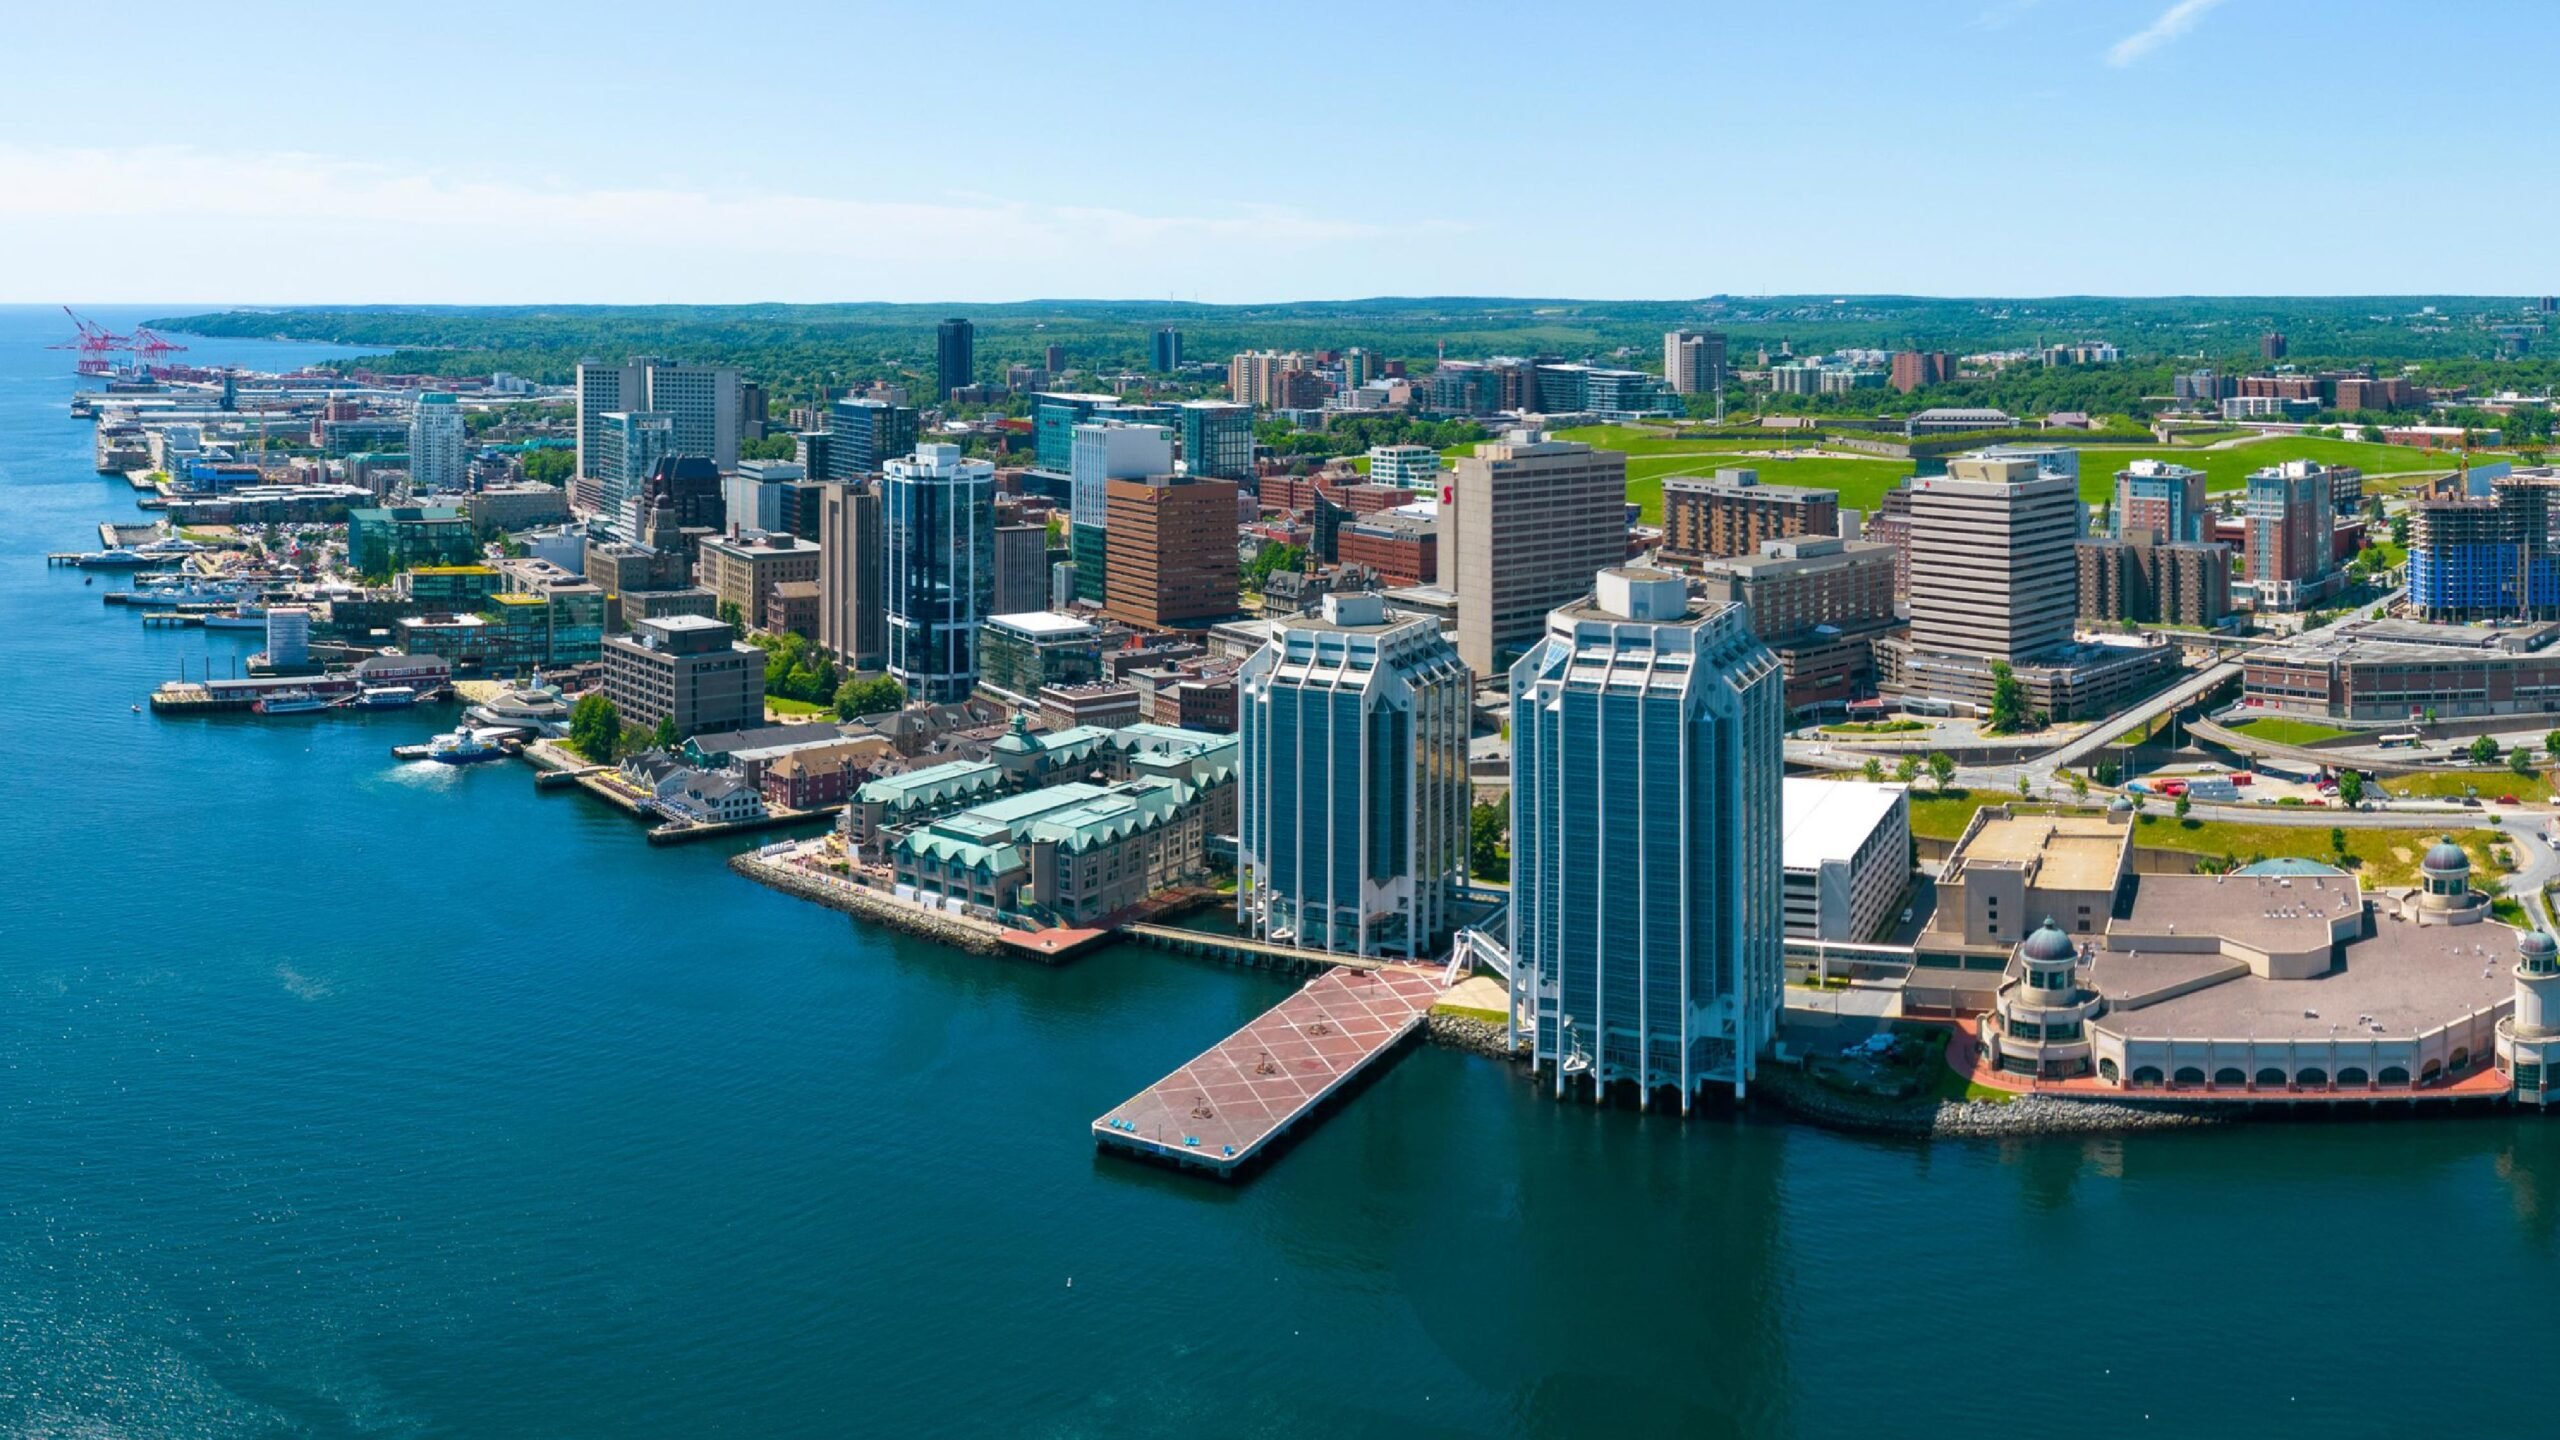 Aerial view of Halifax's waterfront in Nova Scotia, Canada